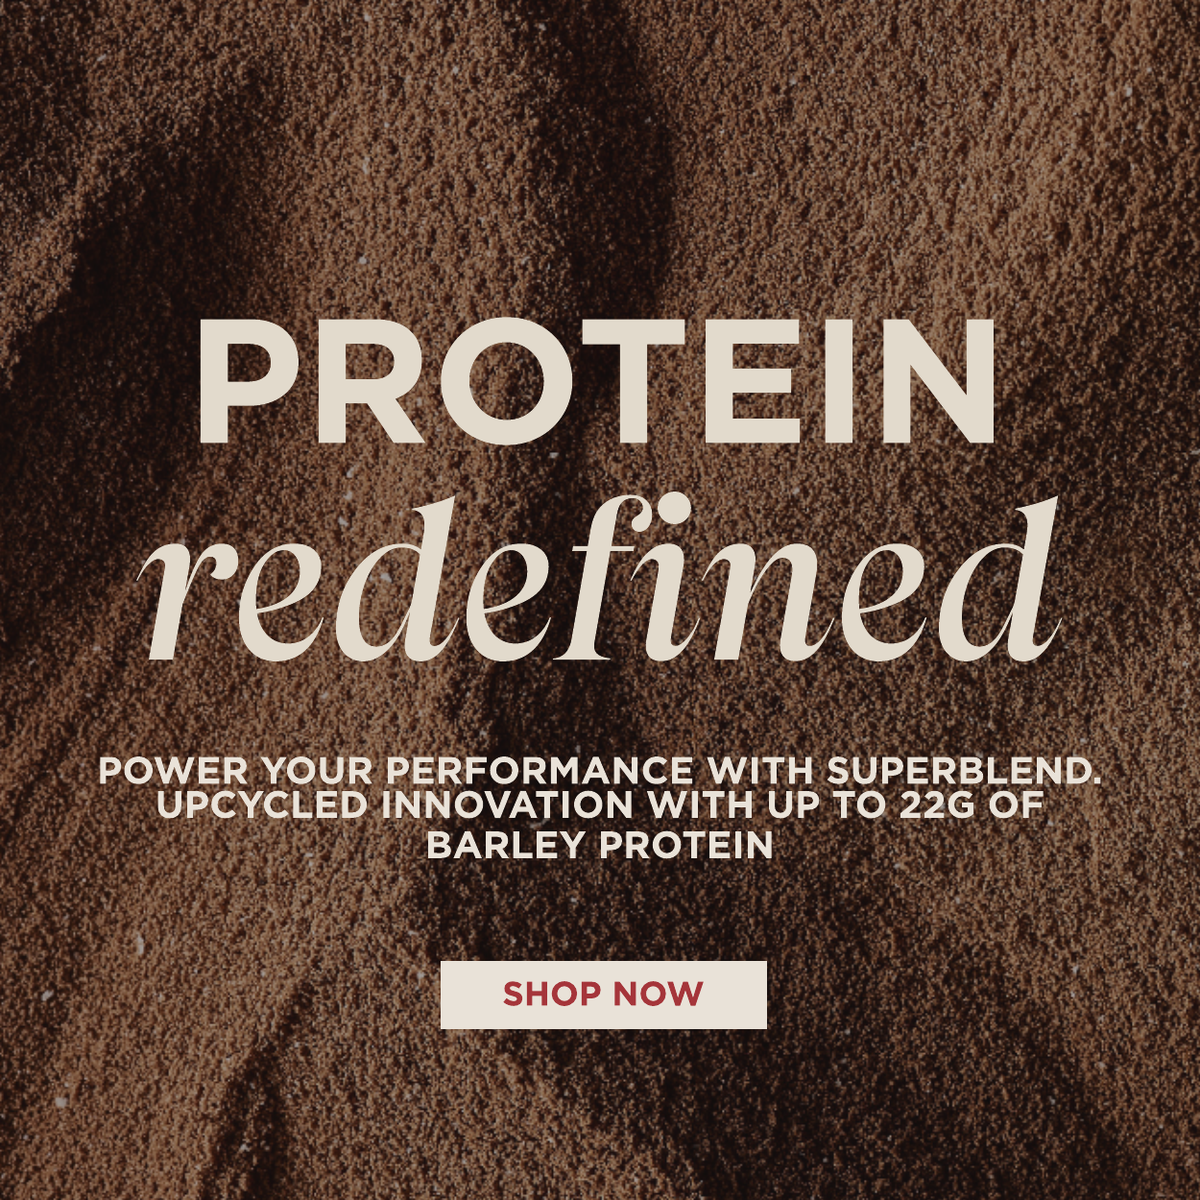 Discover Plant Protein Superblend, packed with 20 grams of protein & made with upcycled barley